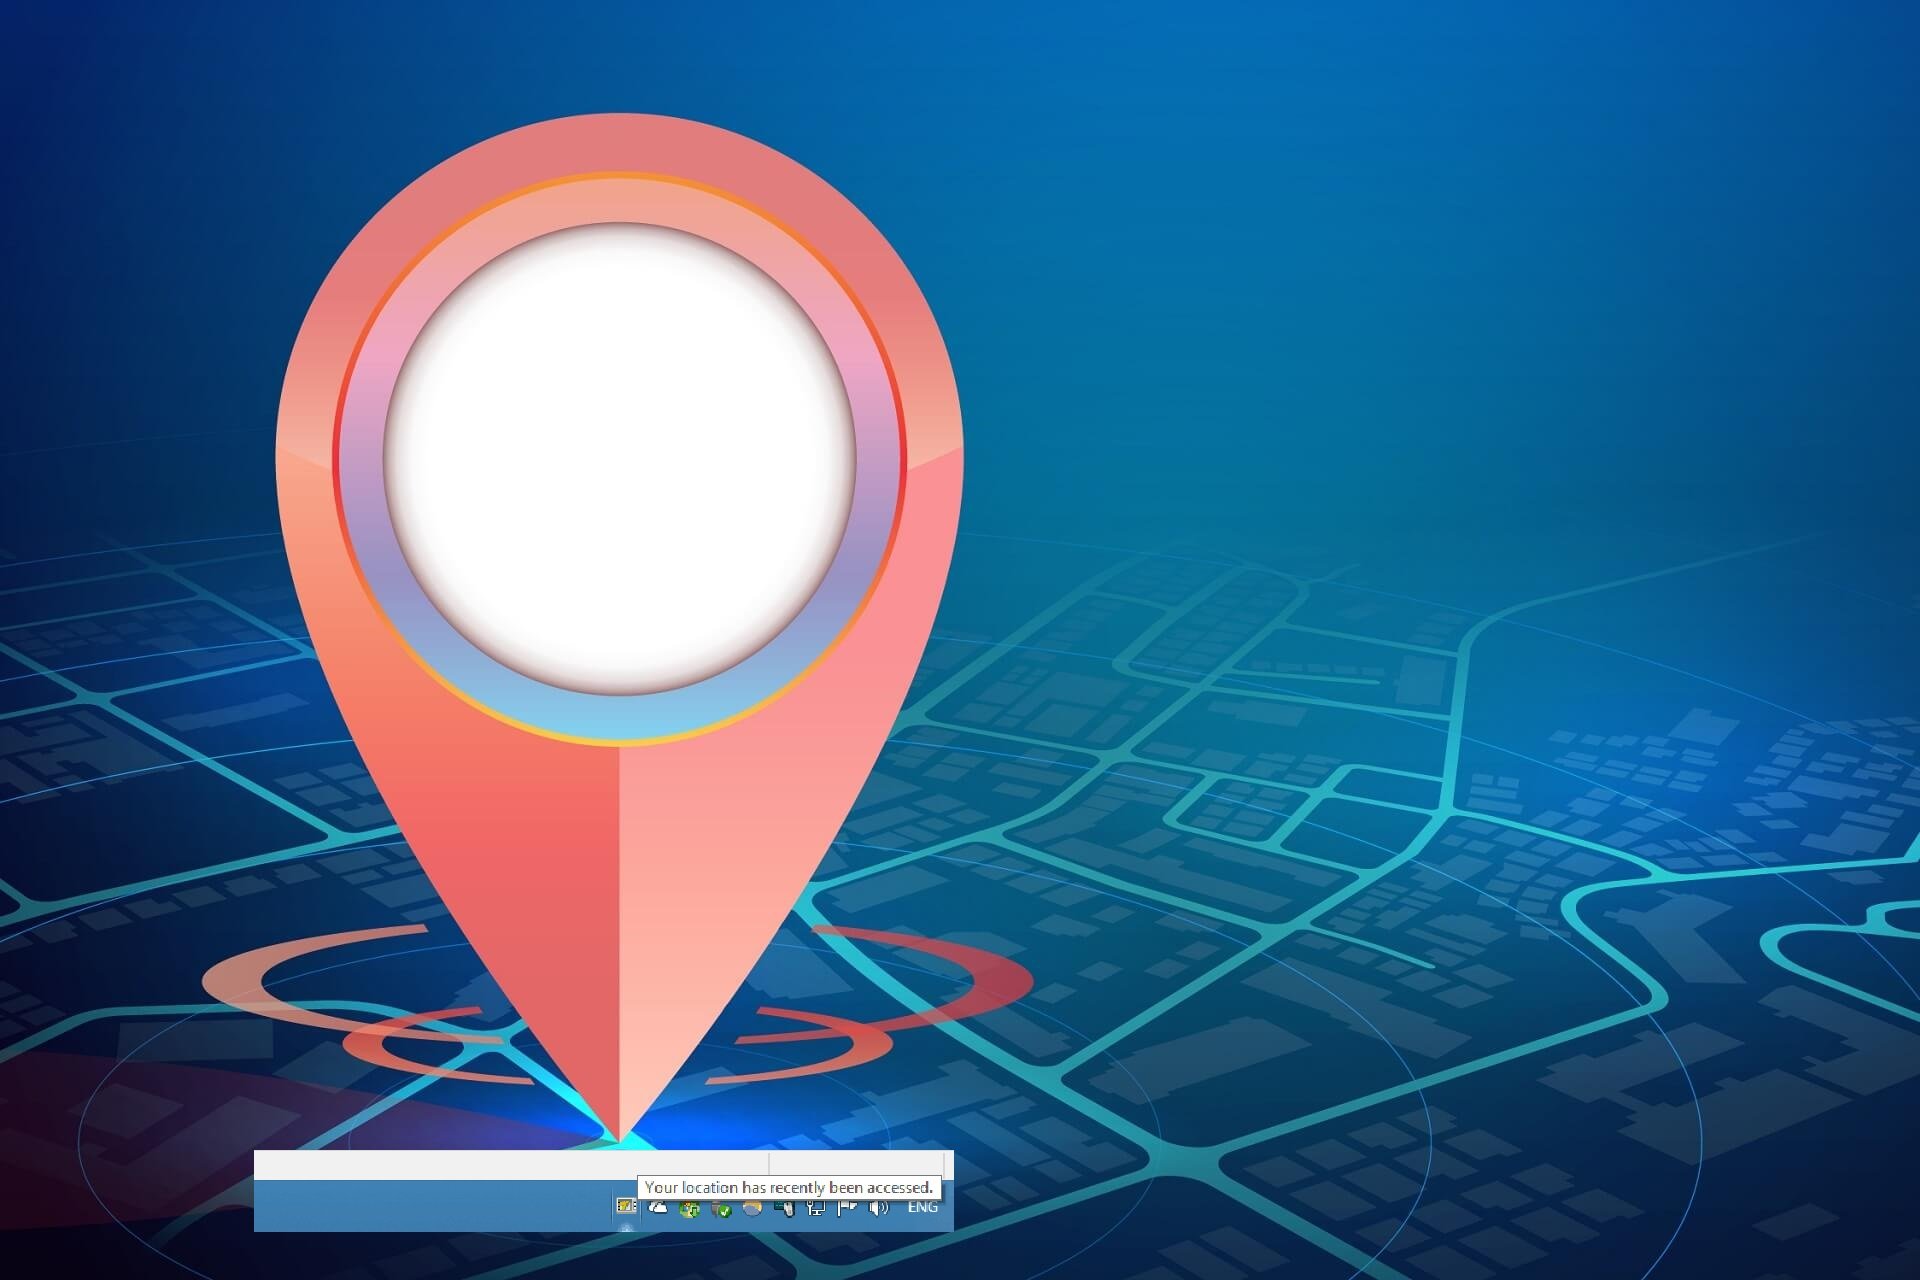 How to fix Your location has recently been accessed